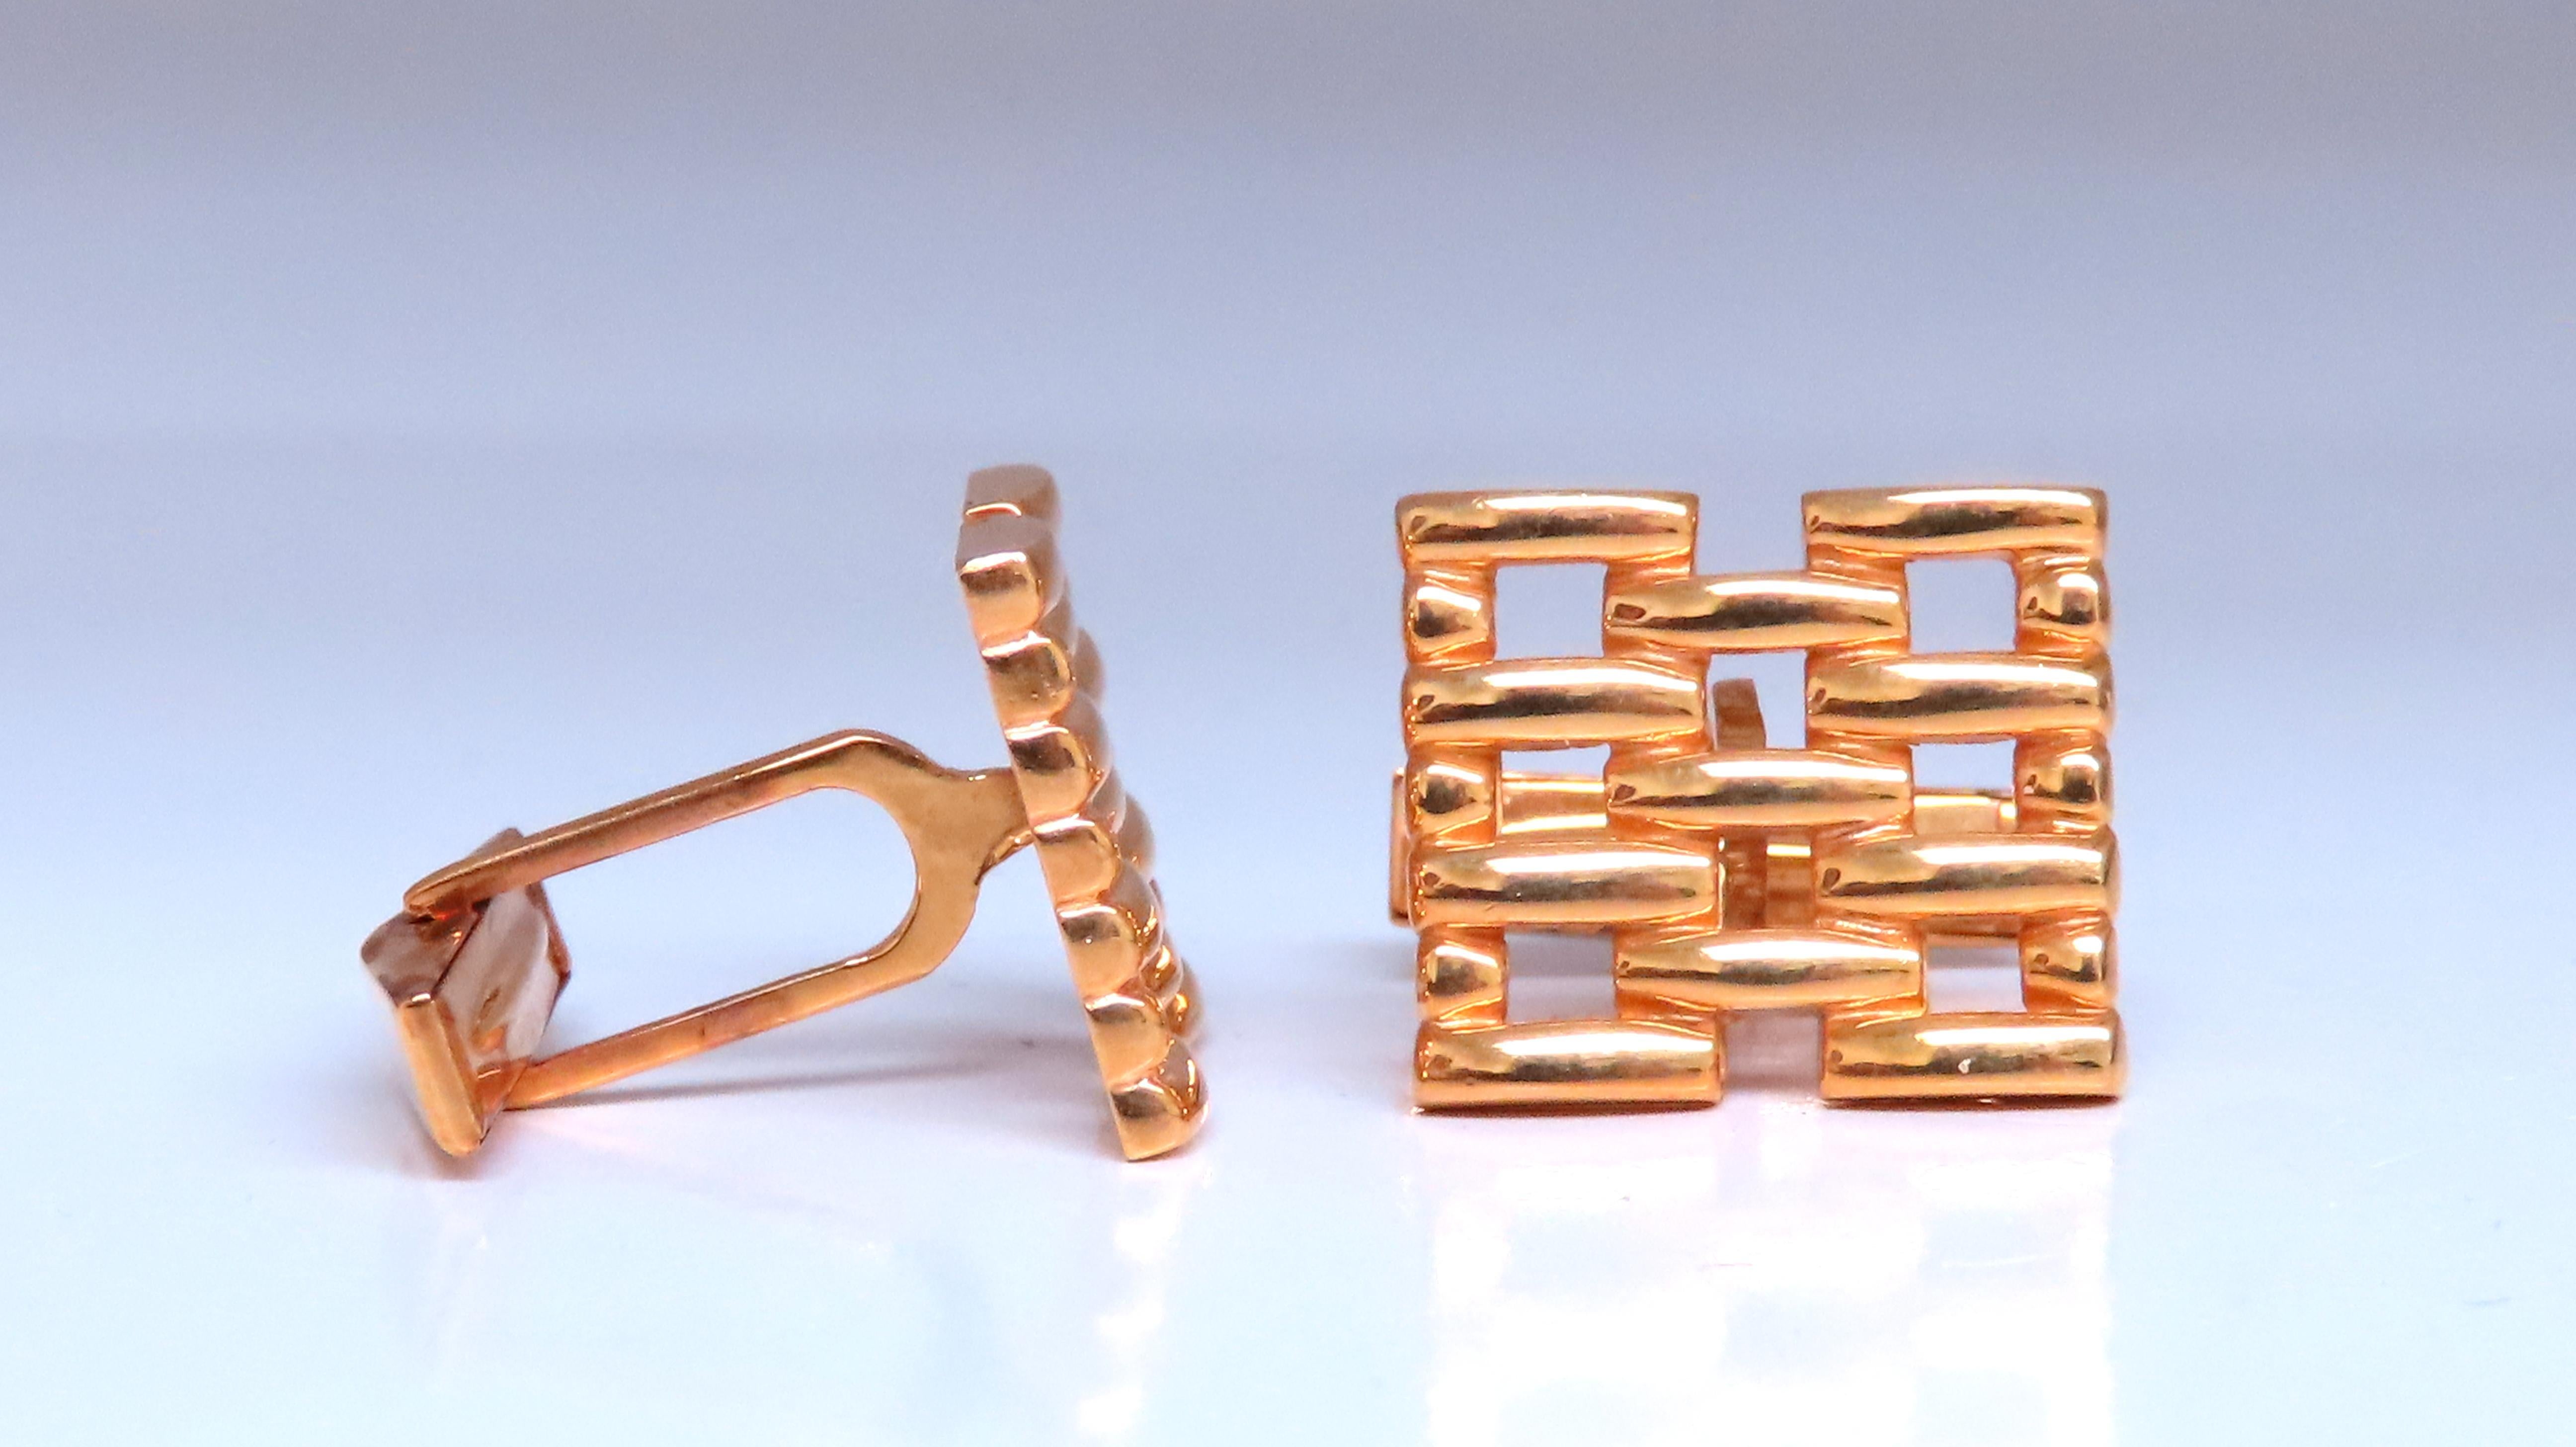 Staggered Brick form Cufflinks
17x14 mm
14kt yellow gold
9.7 grams